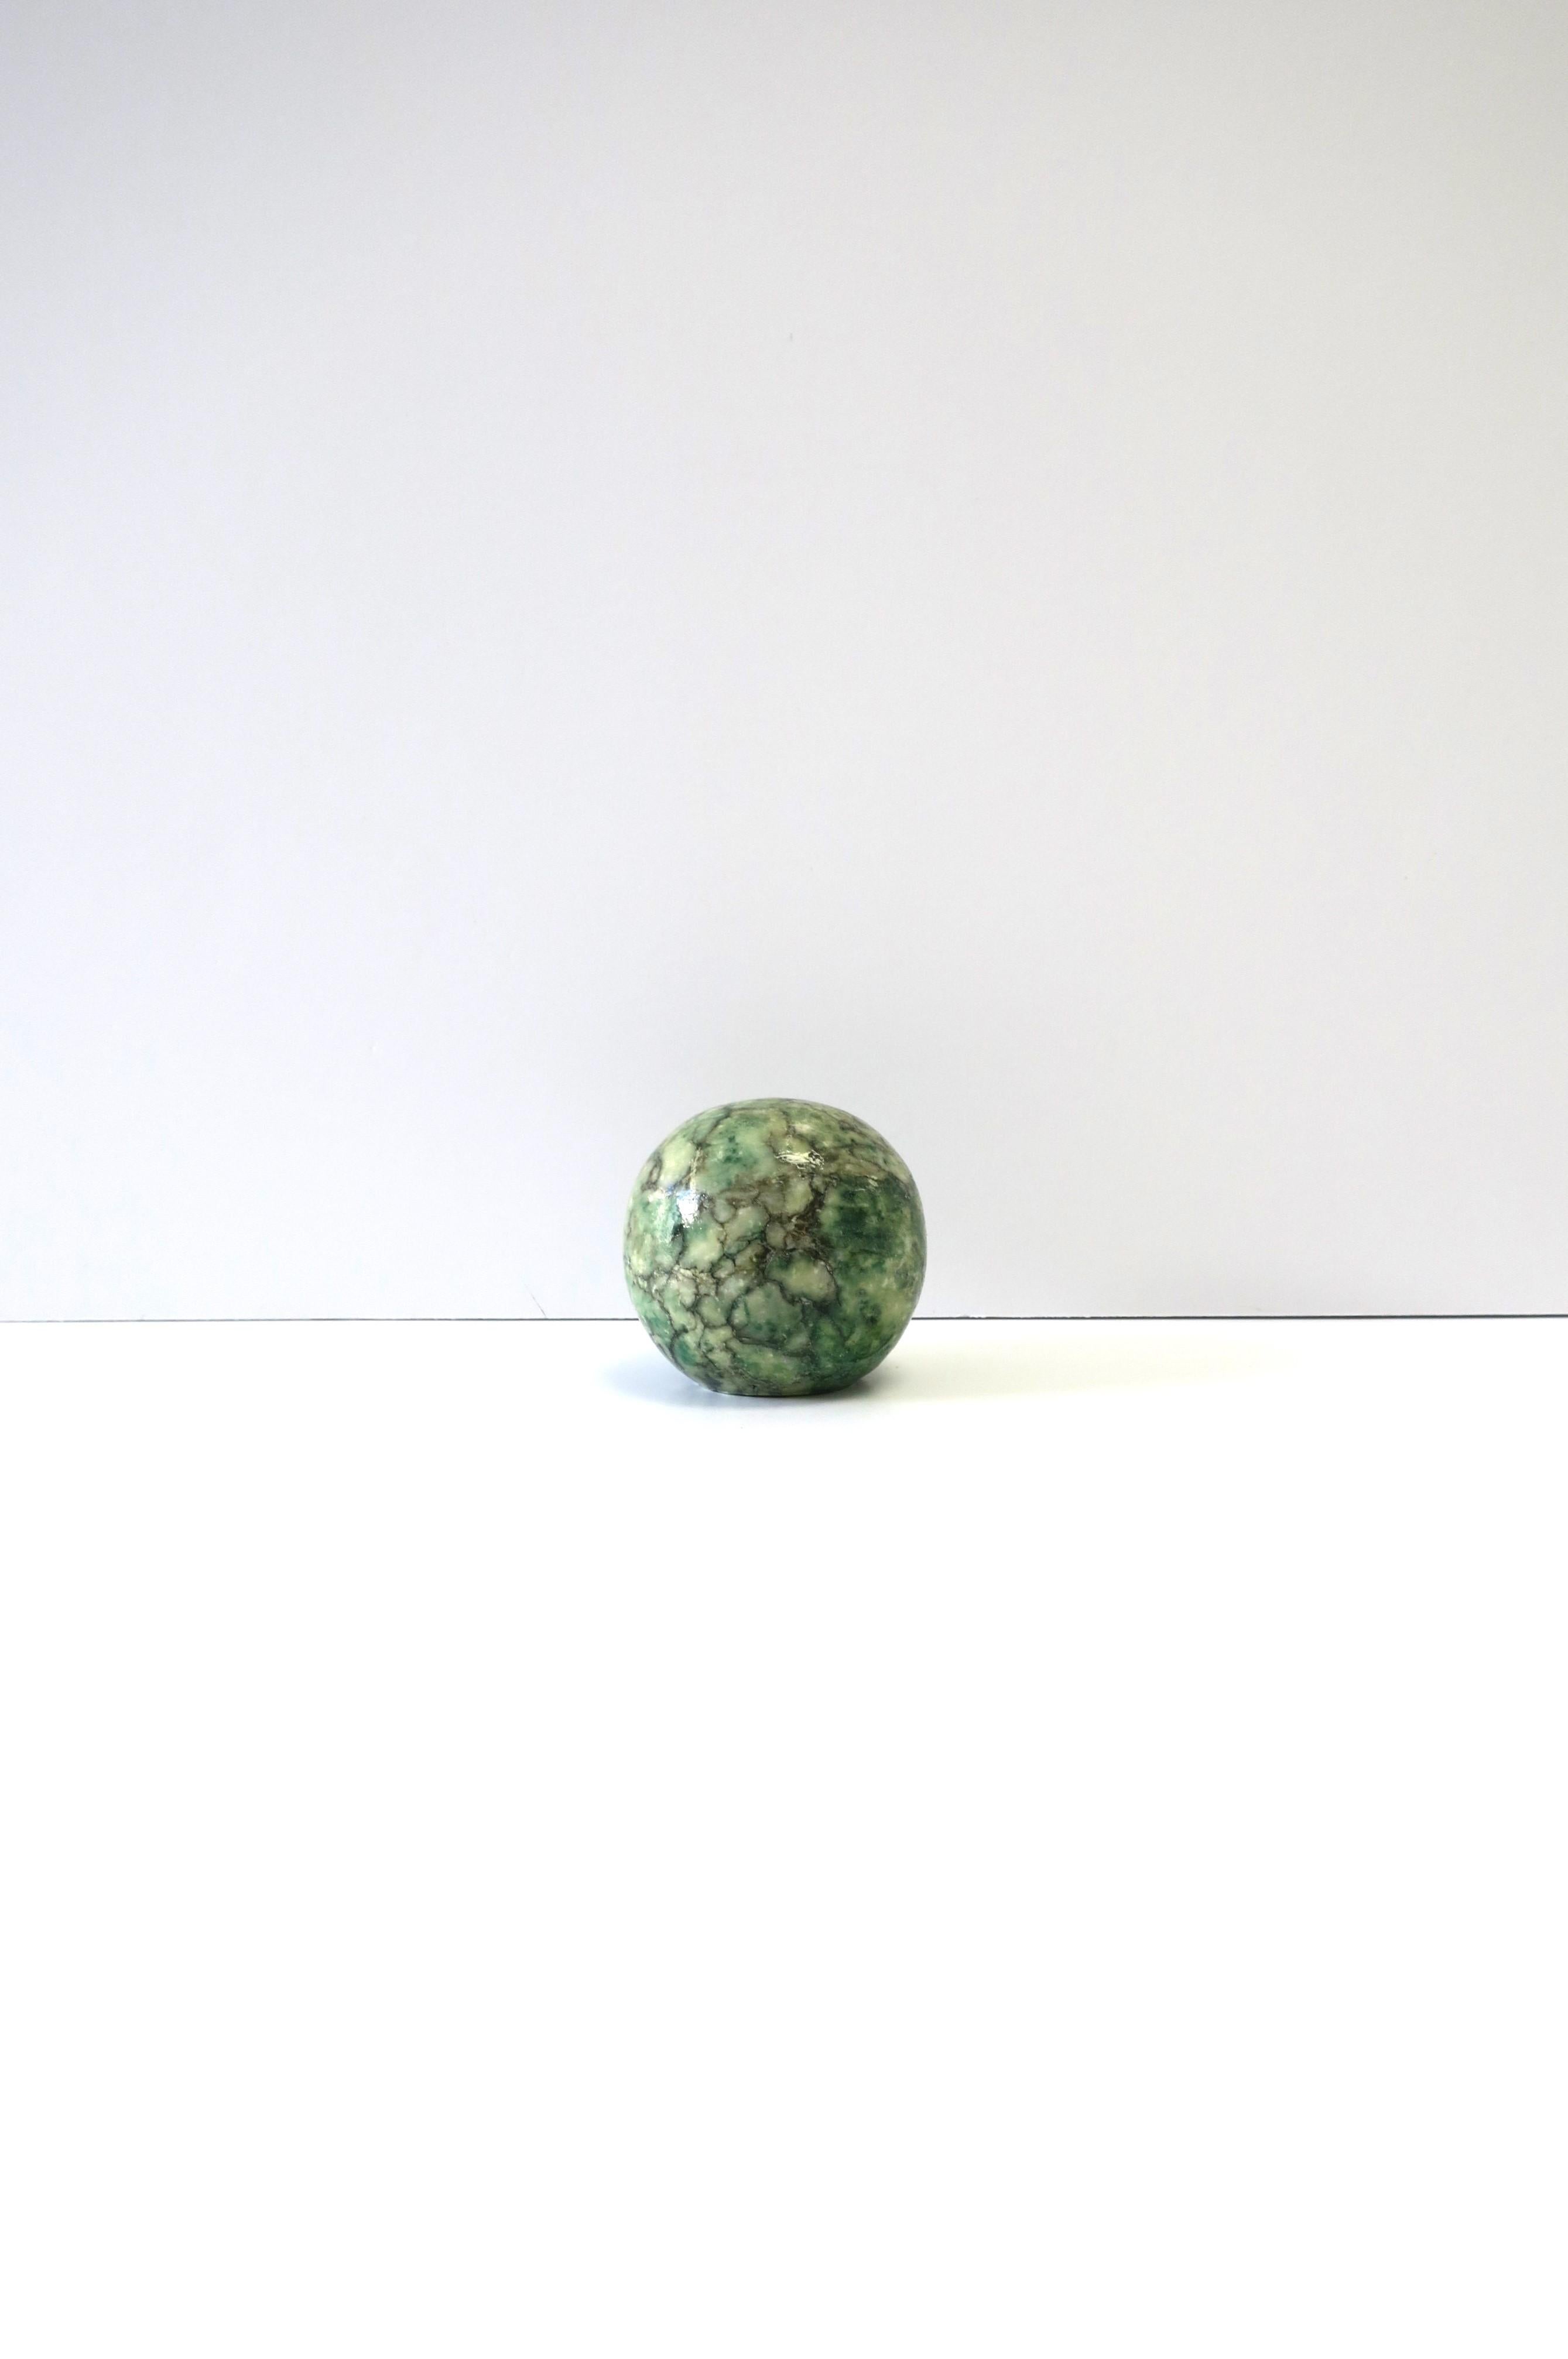 A small green, black and white alabaster marble decorative object sphere or paperweight, '70 Modern, circa 1970s, Italy. A great decorative object or paperweight for an office, desk, shelf, library, etc. Dimensions: 2.25